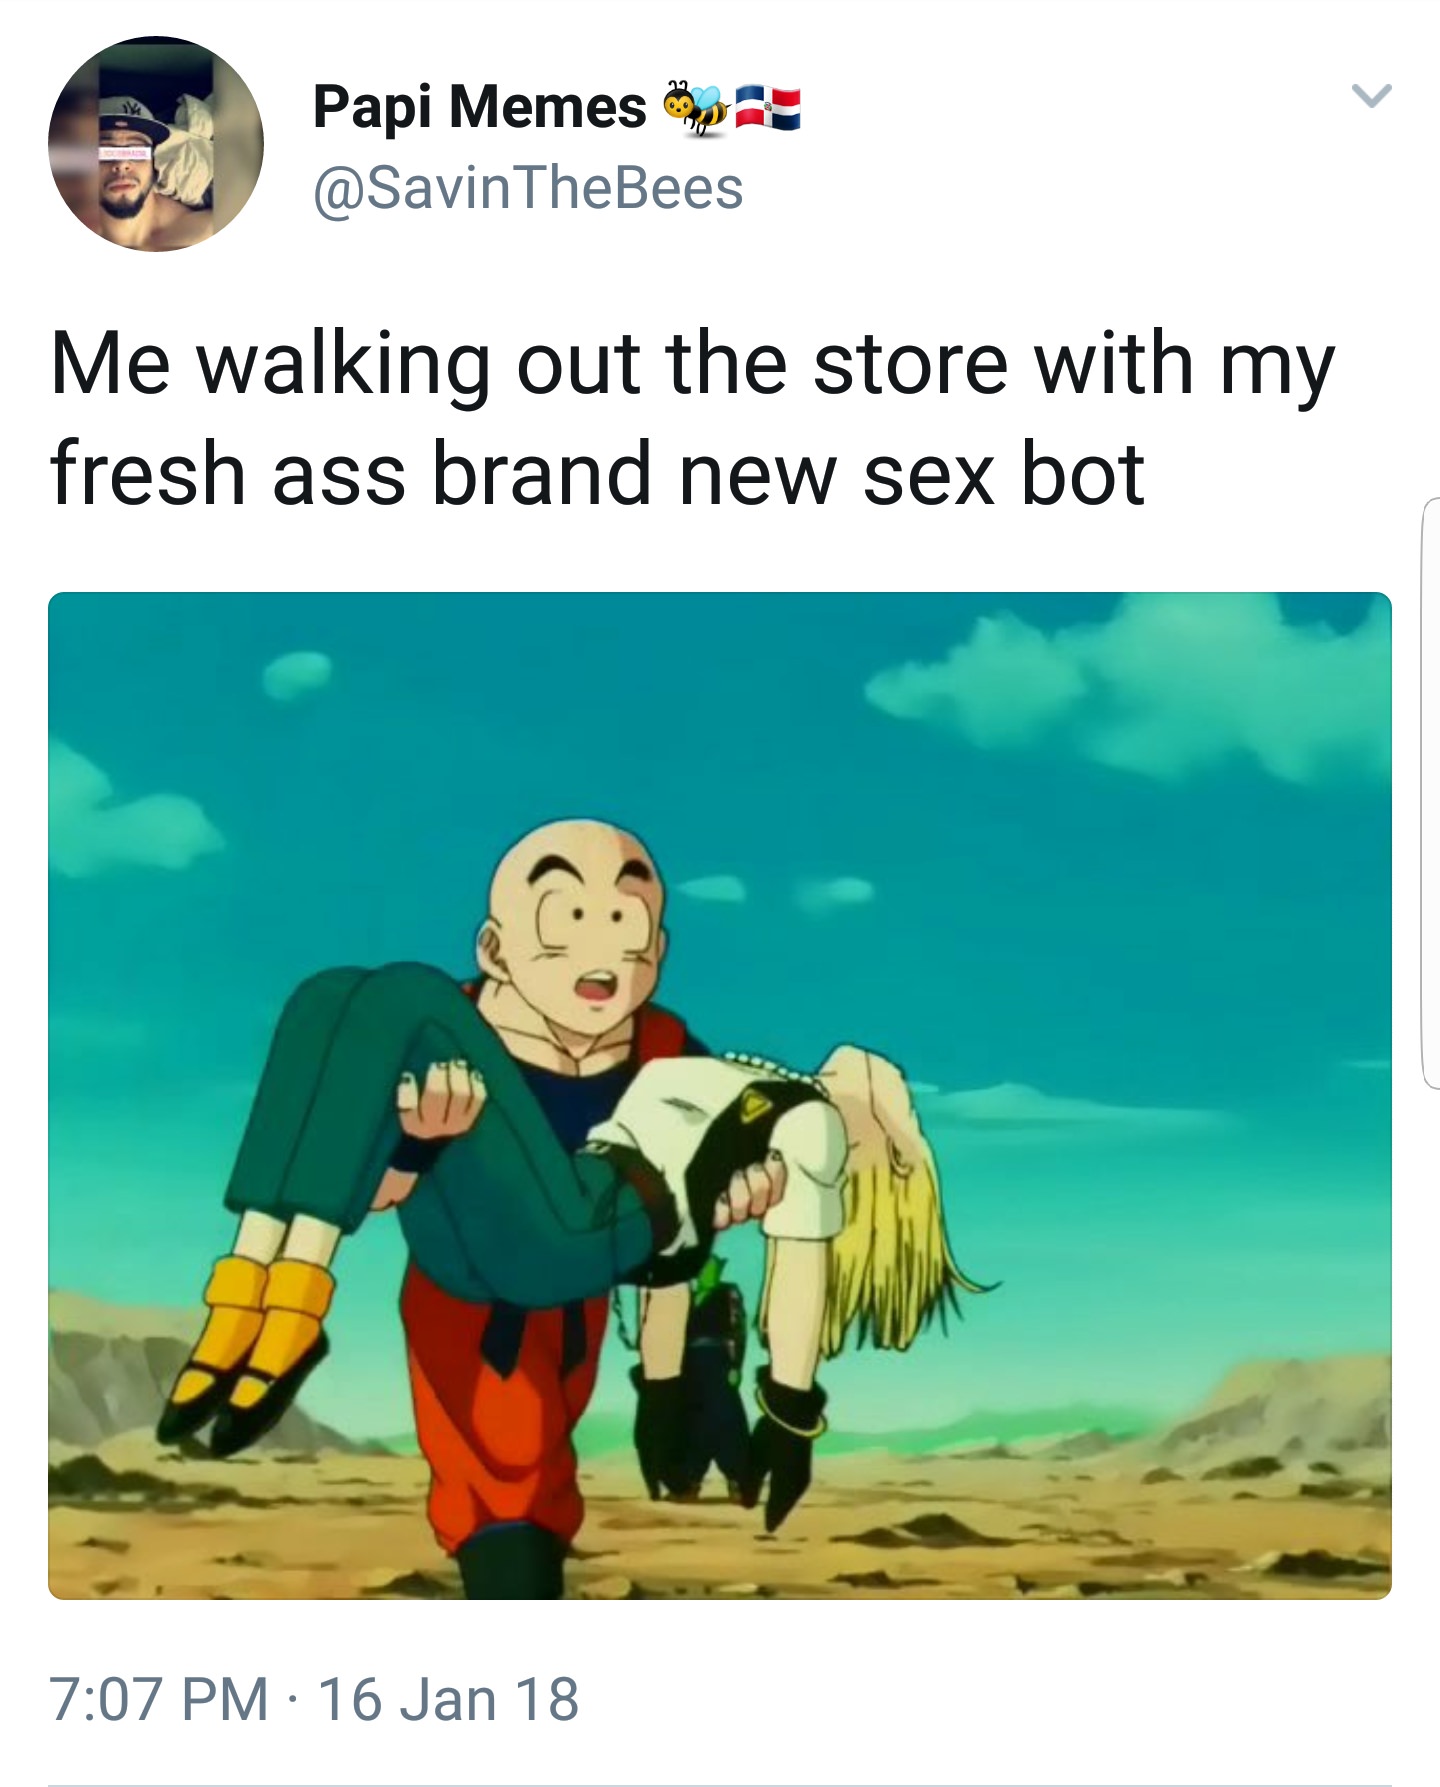 meme stream - we living in 2018 while - Papi Memes pas Me walking out the store with my fresh ass brand new sex bot 16 Jan 18